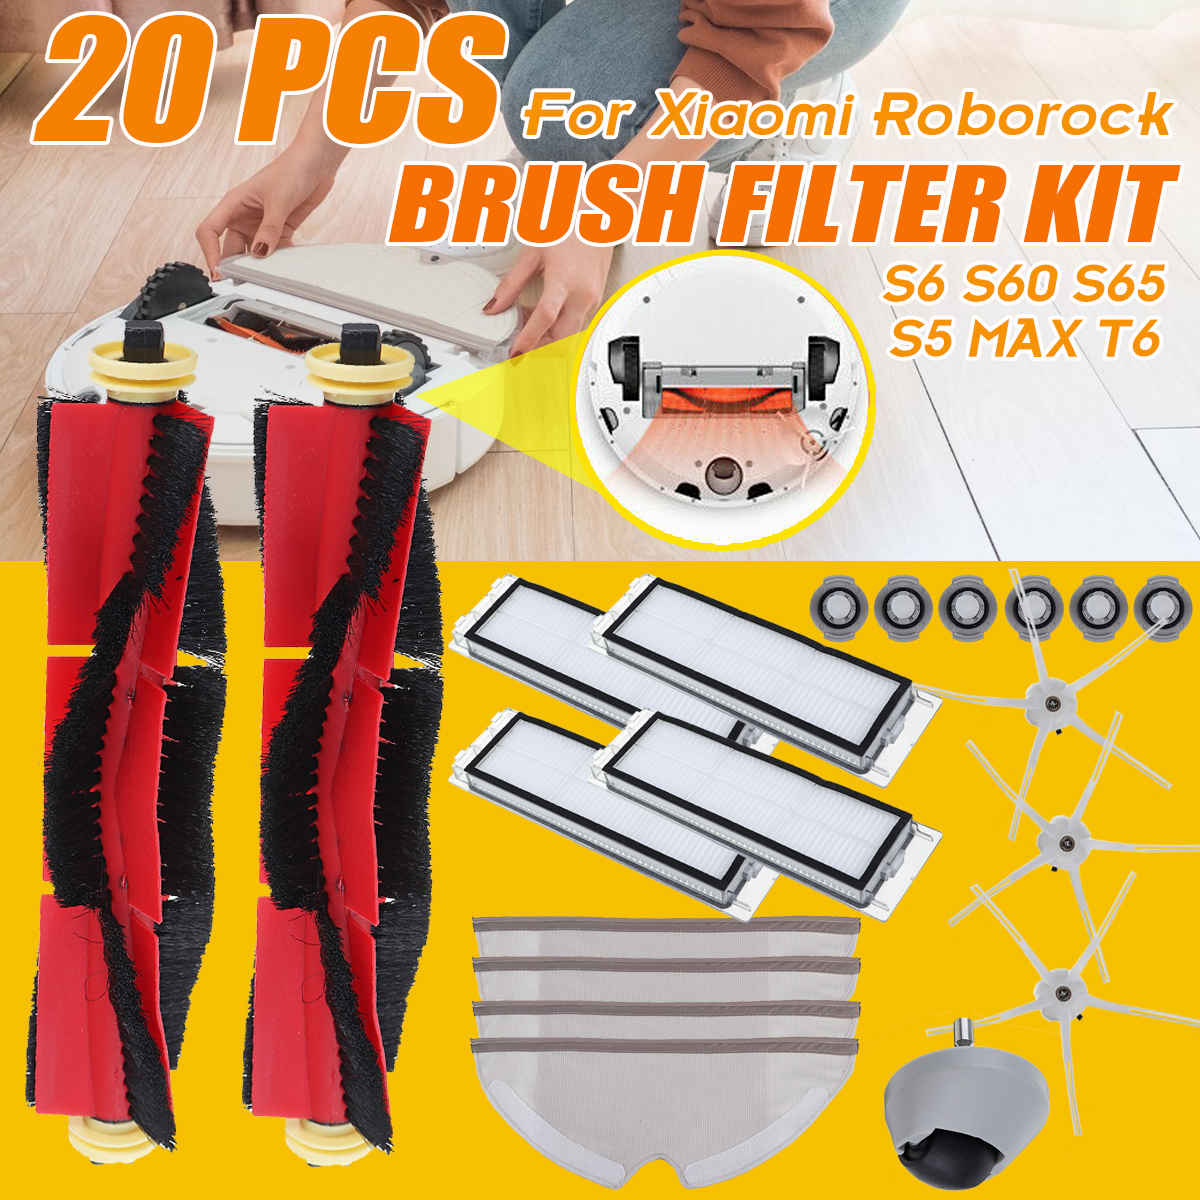 FILTER For Xiaomi Roborock S6/S5 Max S60/S65 Parts SIDE BRUSH MOP Kit New 